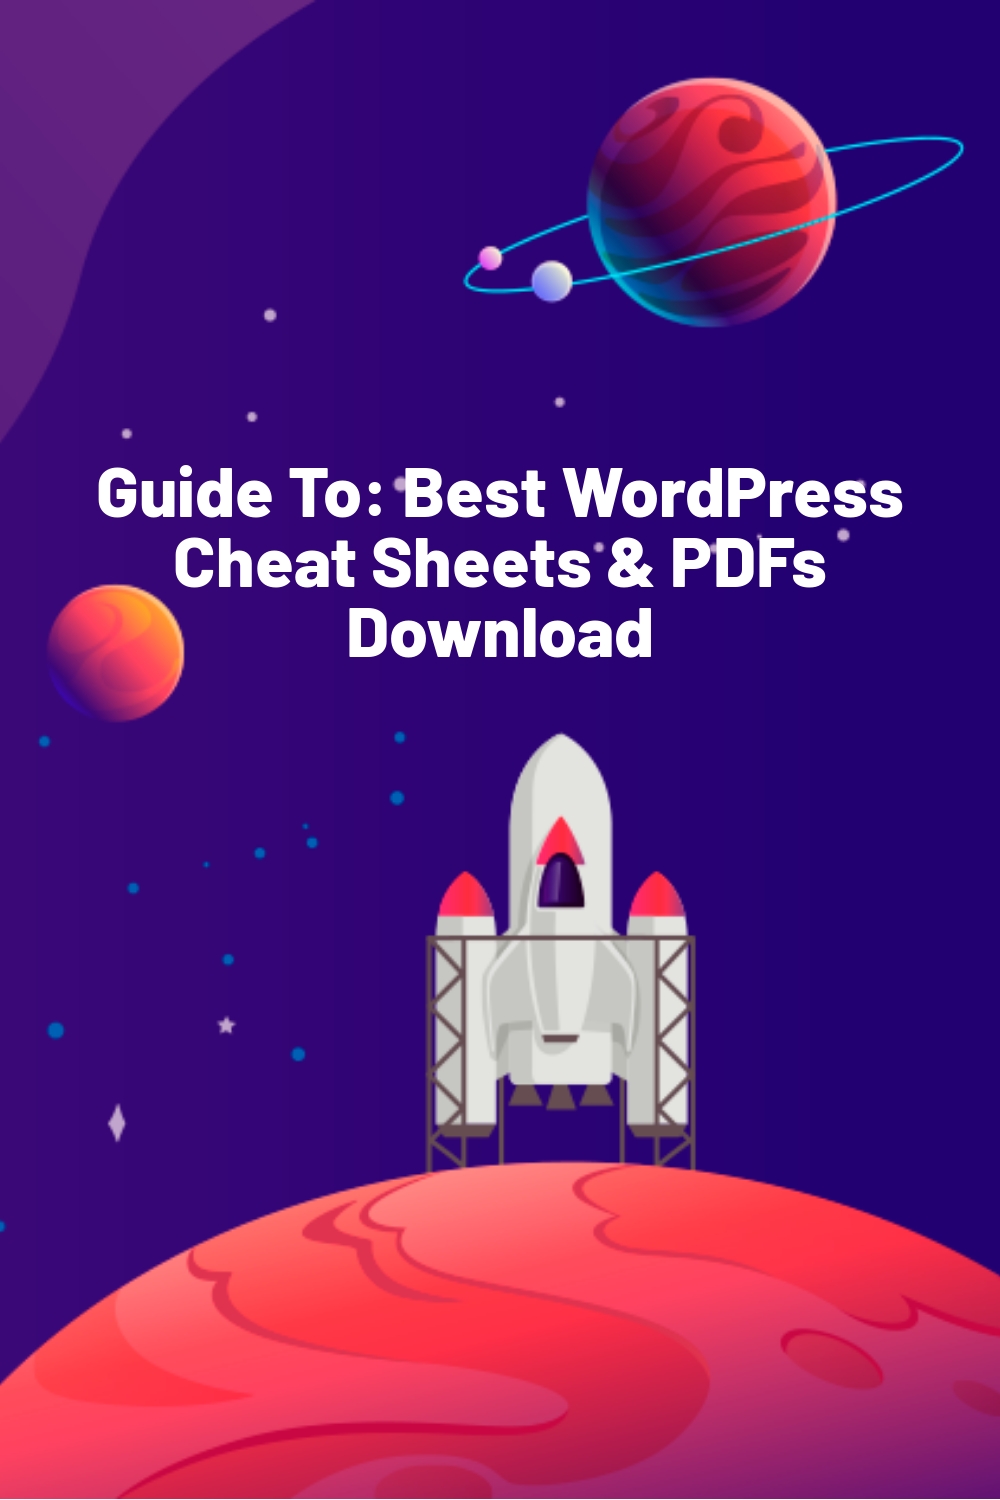 Guide To: Best WordPress Cheat Sheets & PDFs Download